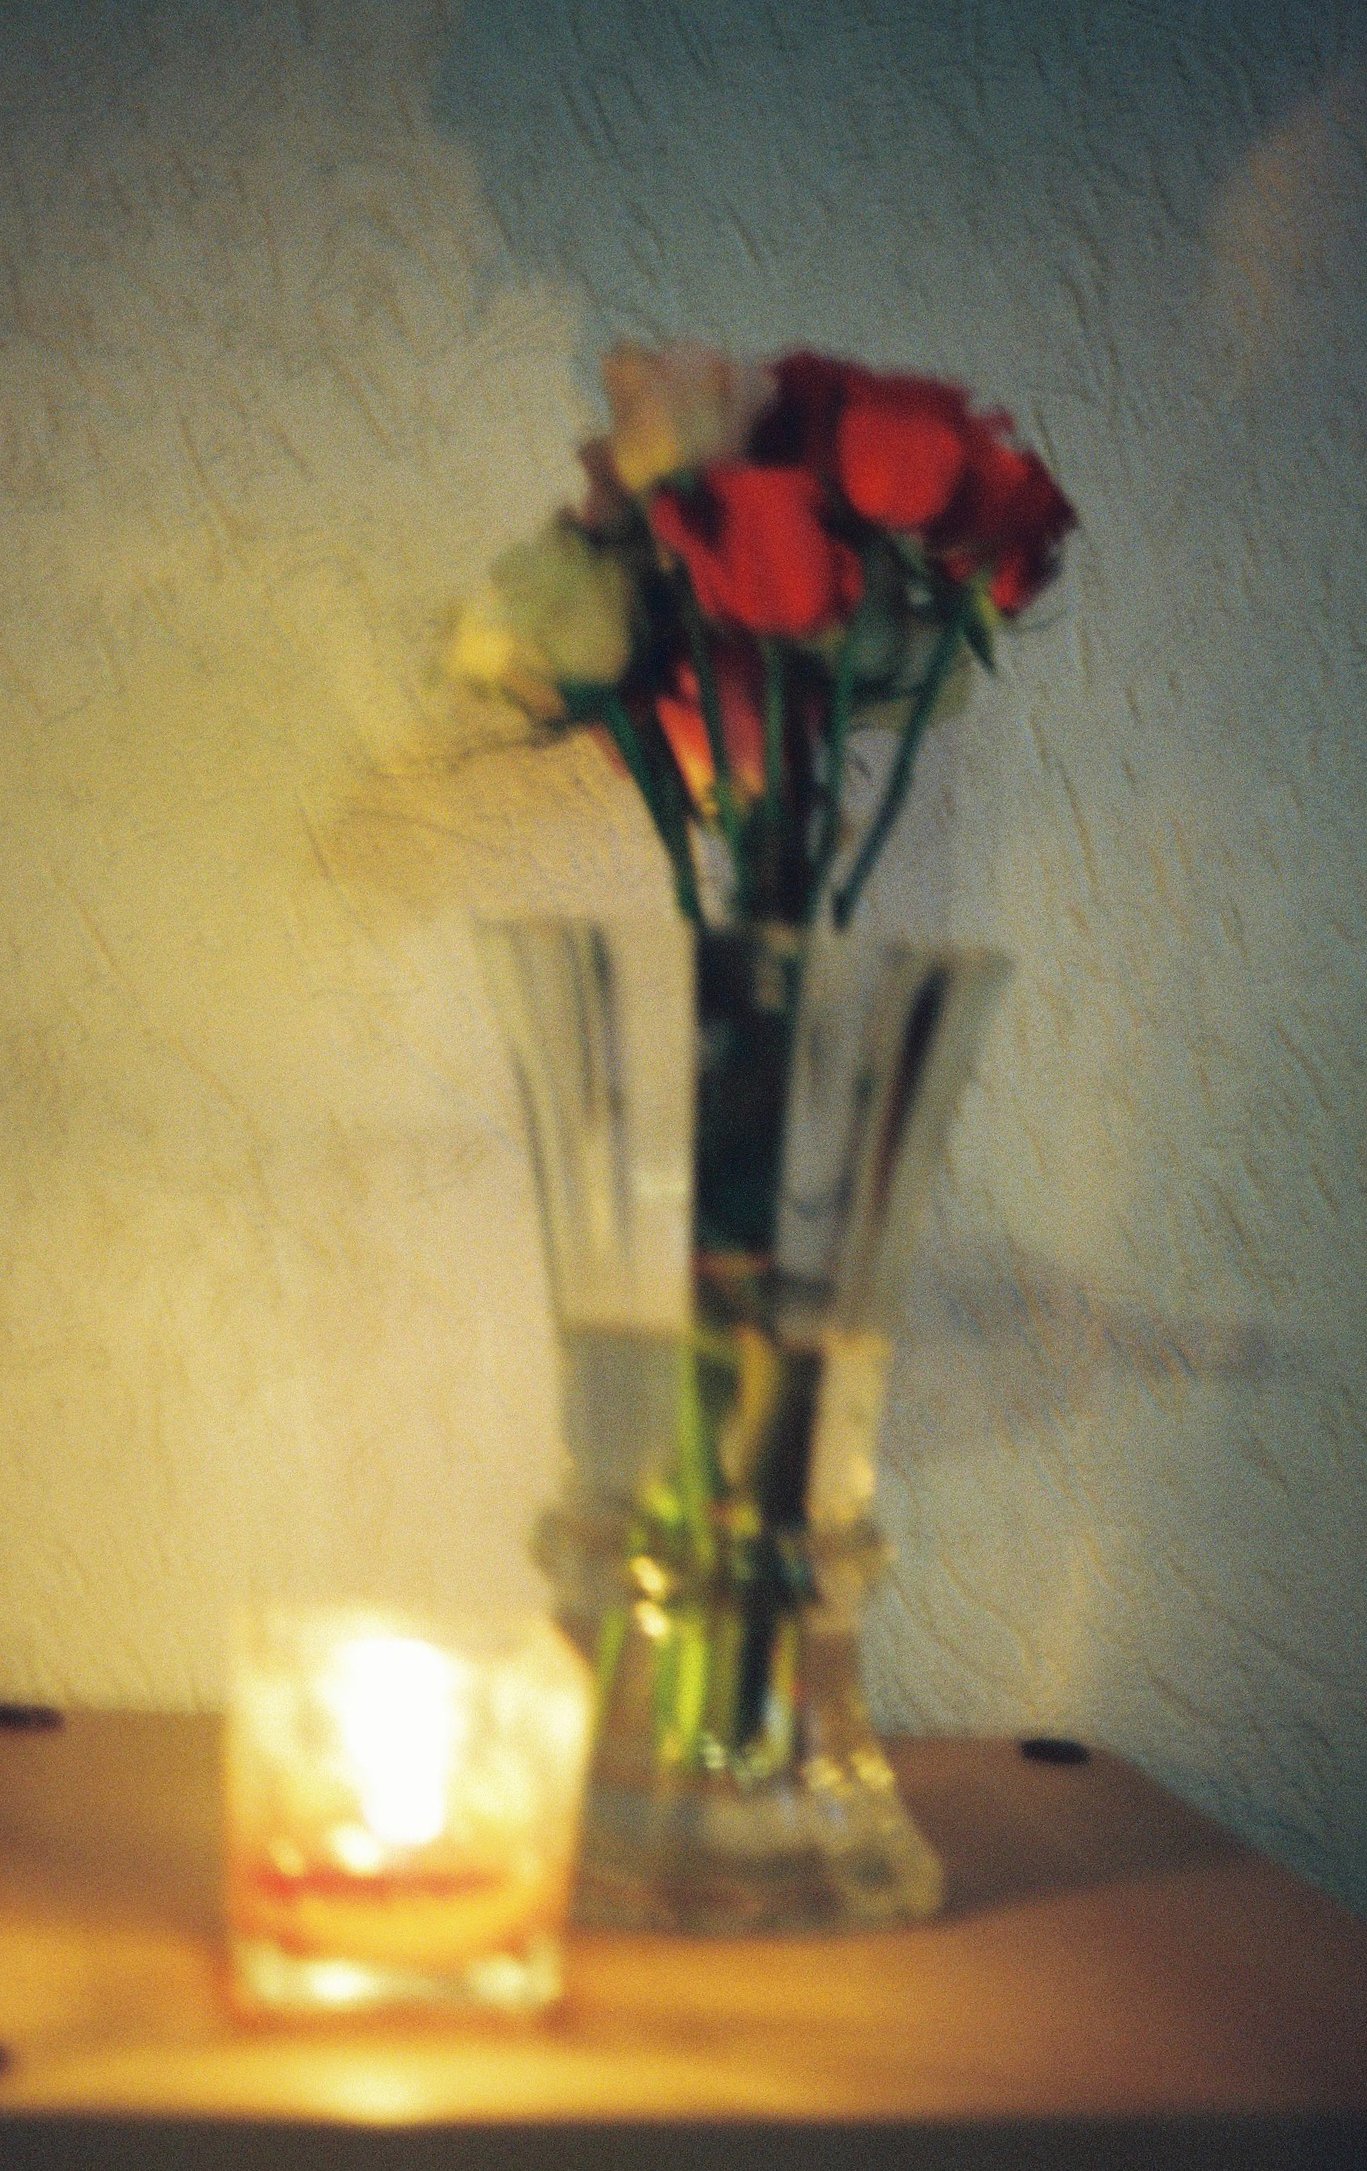 A blurry photo of roses in a vase and a candle light.